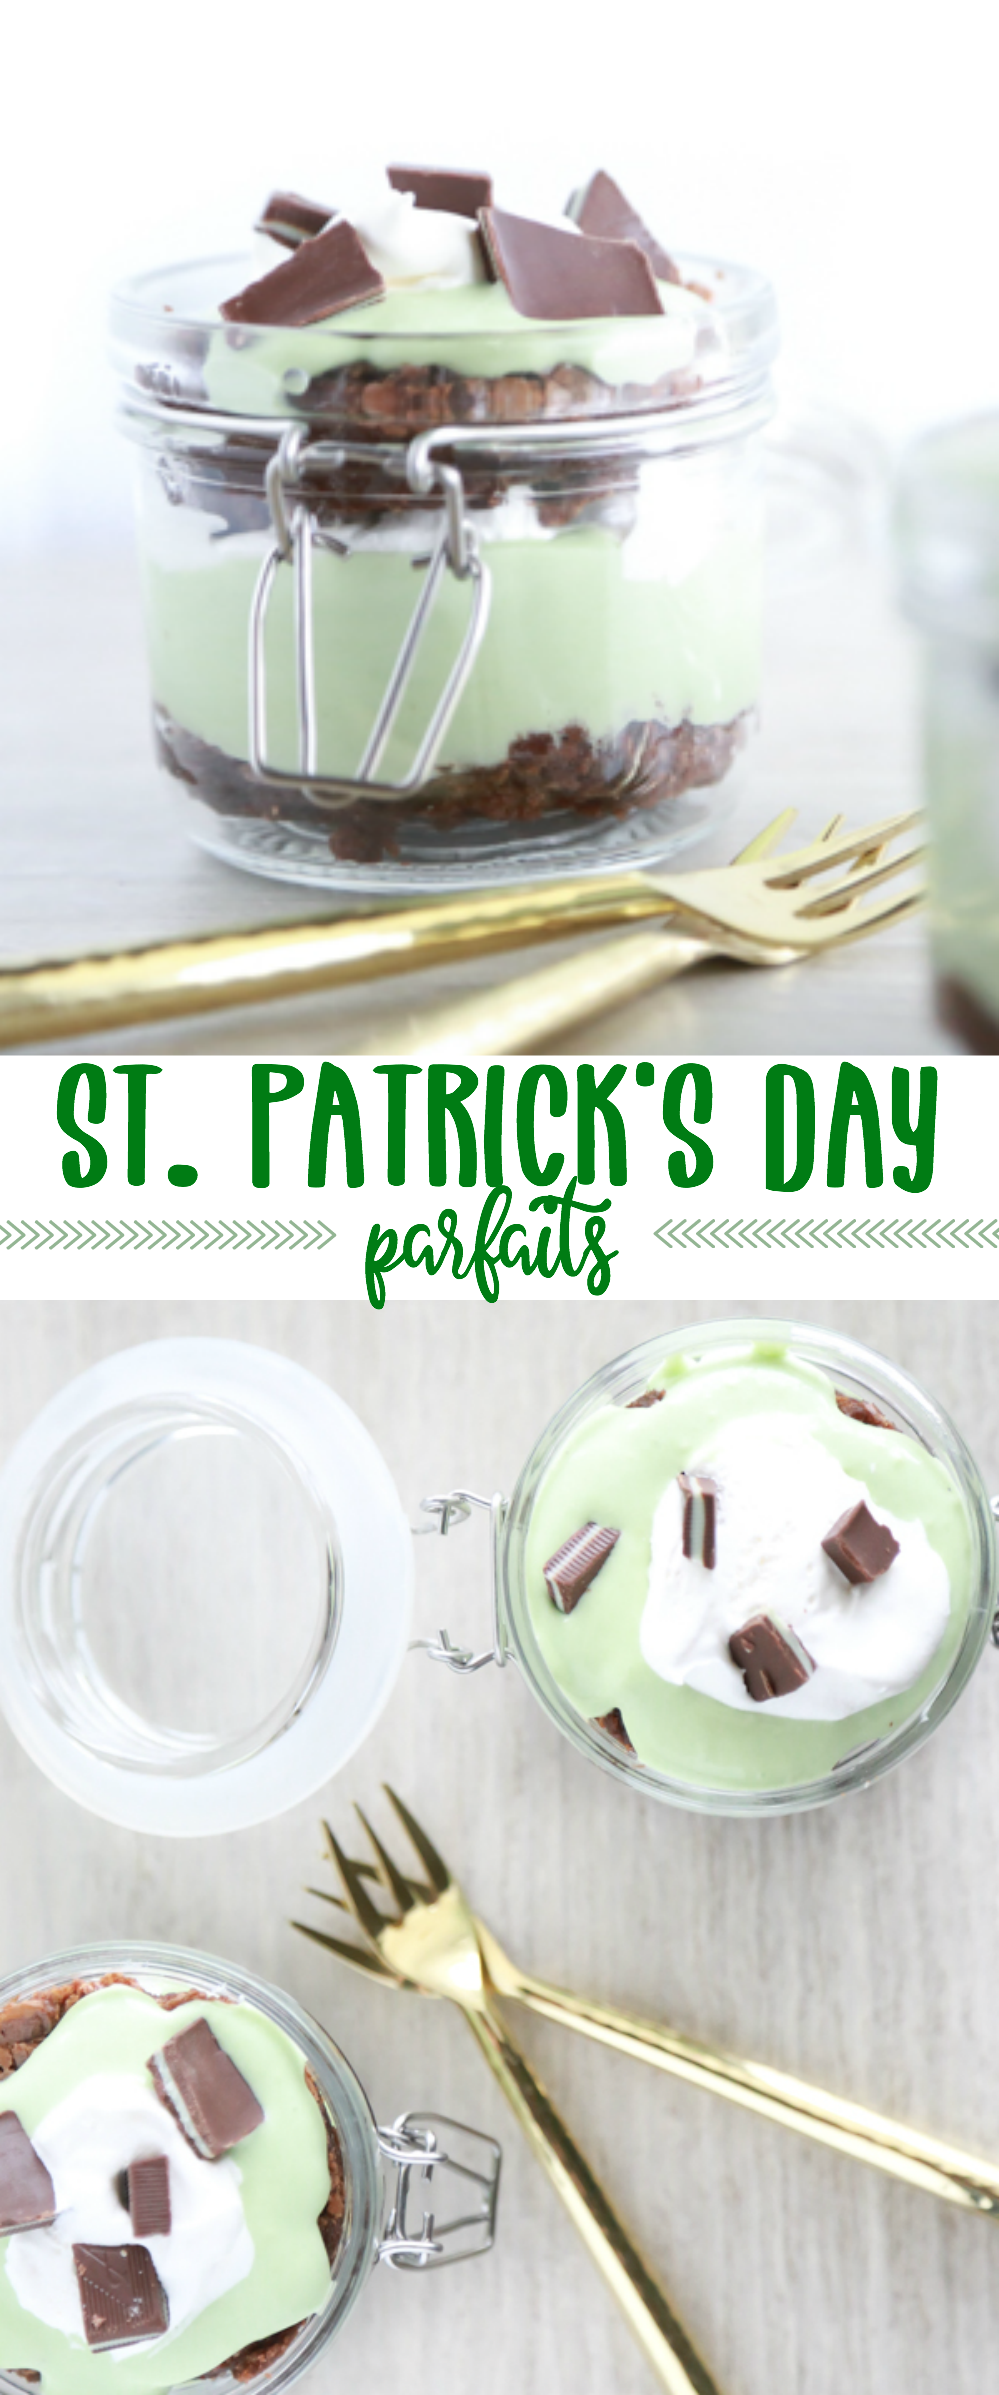 This St. Patrick’s Day Parfait features layers of brownies, mint pudding, Cool Whip, and crushed Andes mints. For a delicious St. Patrick’s Day treat, try this St. Patrick’s Day Parfait.